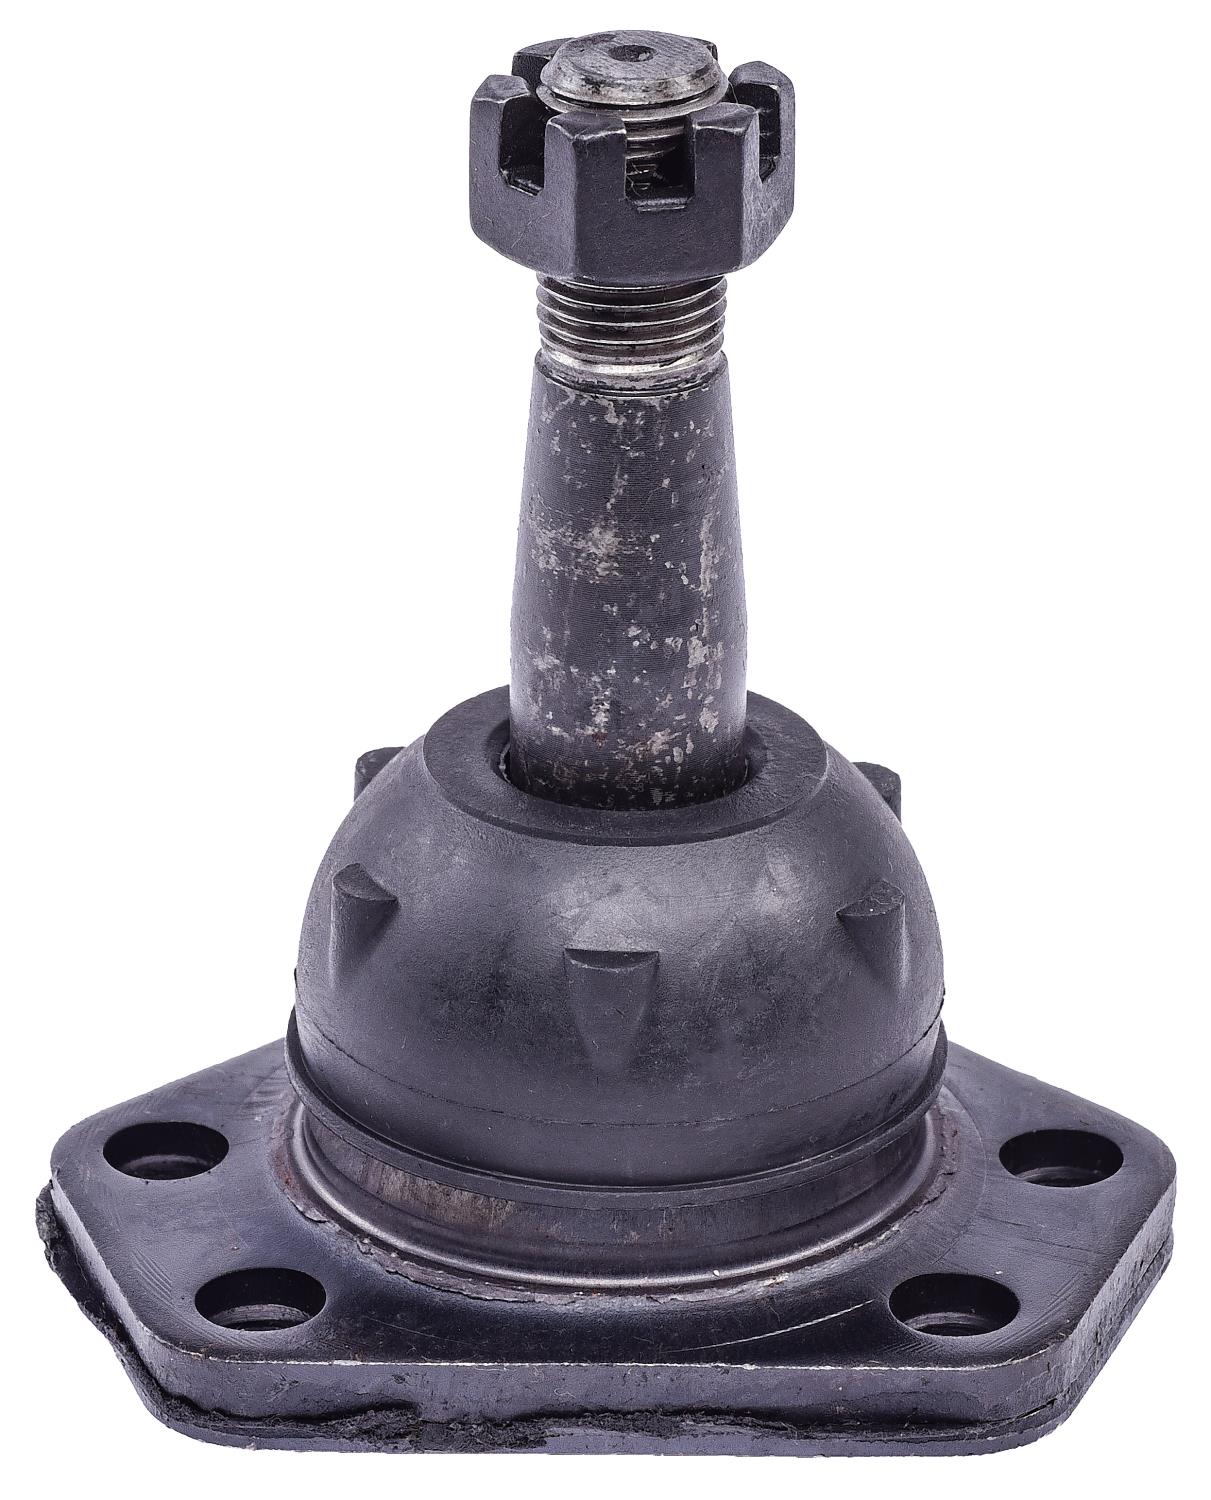 Front Upper Ball Joint Fits Select 1970-2005 GM Buick, Cadillac, Chevy, GMC, Isuzu, Oldsmobile, Pontiac Models